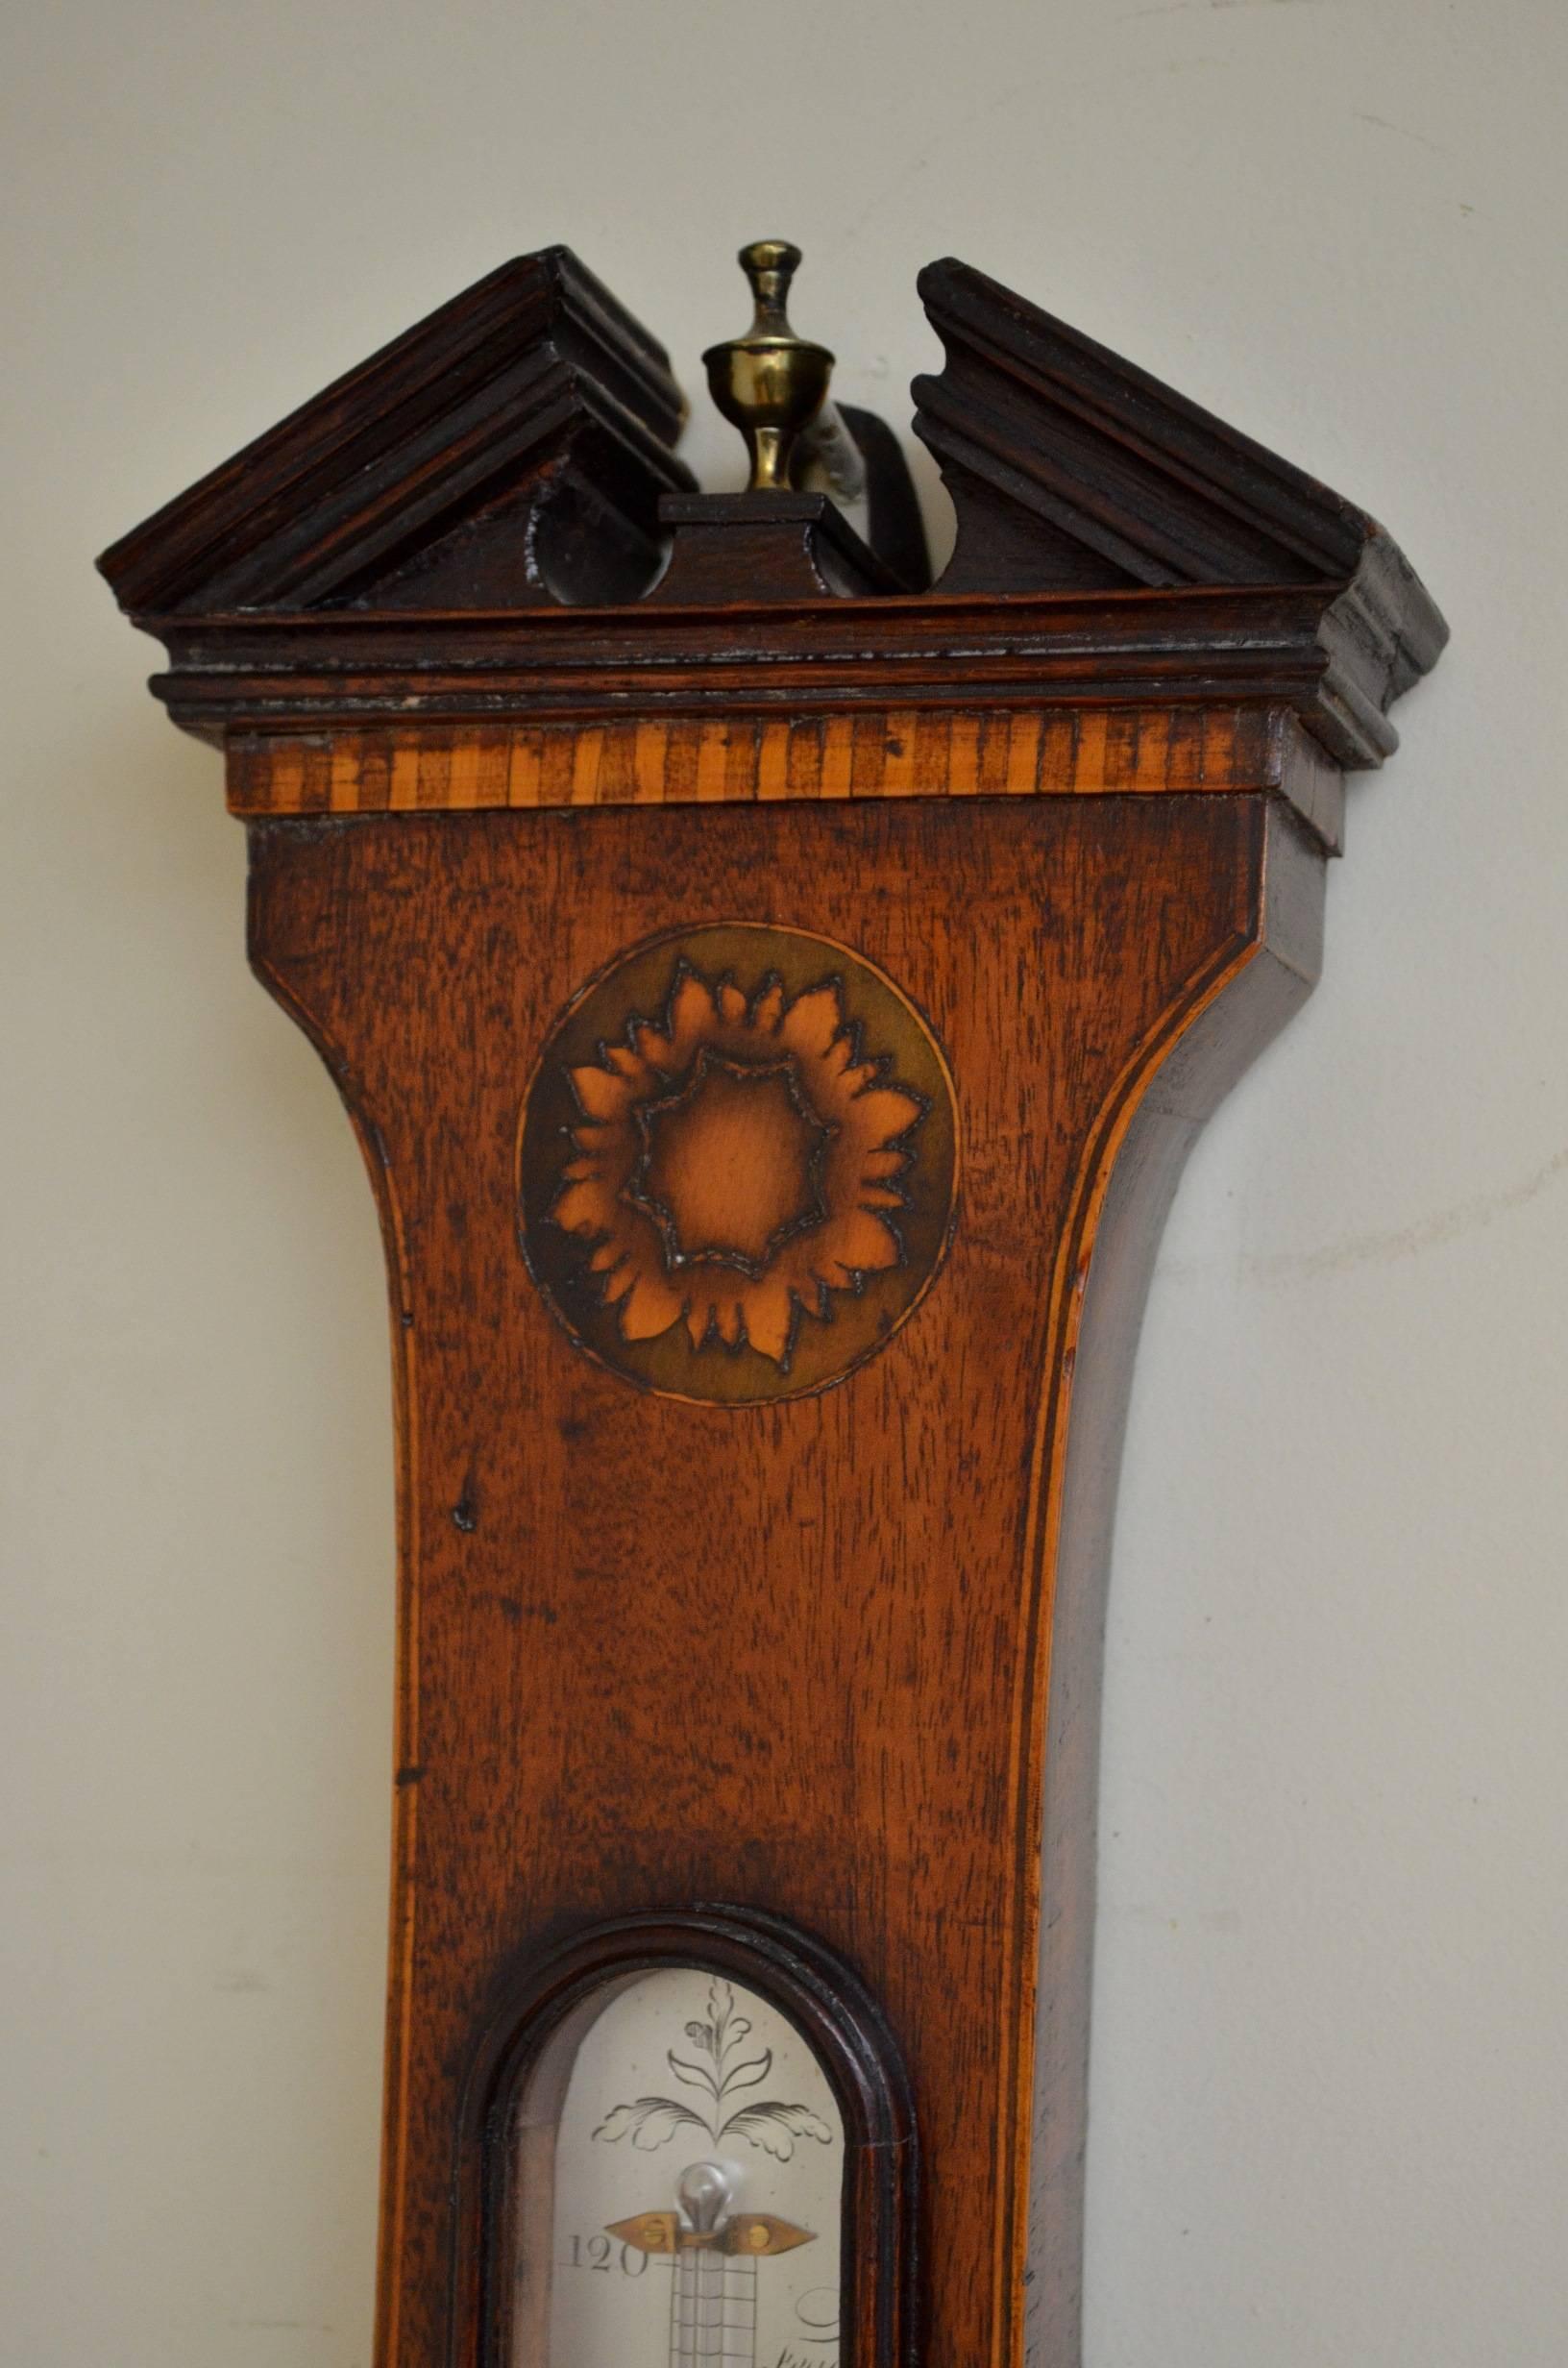 A fine quality, Regency mahogany wheel barometer, the mahogany veneered case with architectural pediment above dentil banding, crossbanded edge with triple edge line stringing, inlaid floral paterea and oak and acorn ovals, the 8” dial well engraved